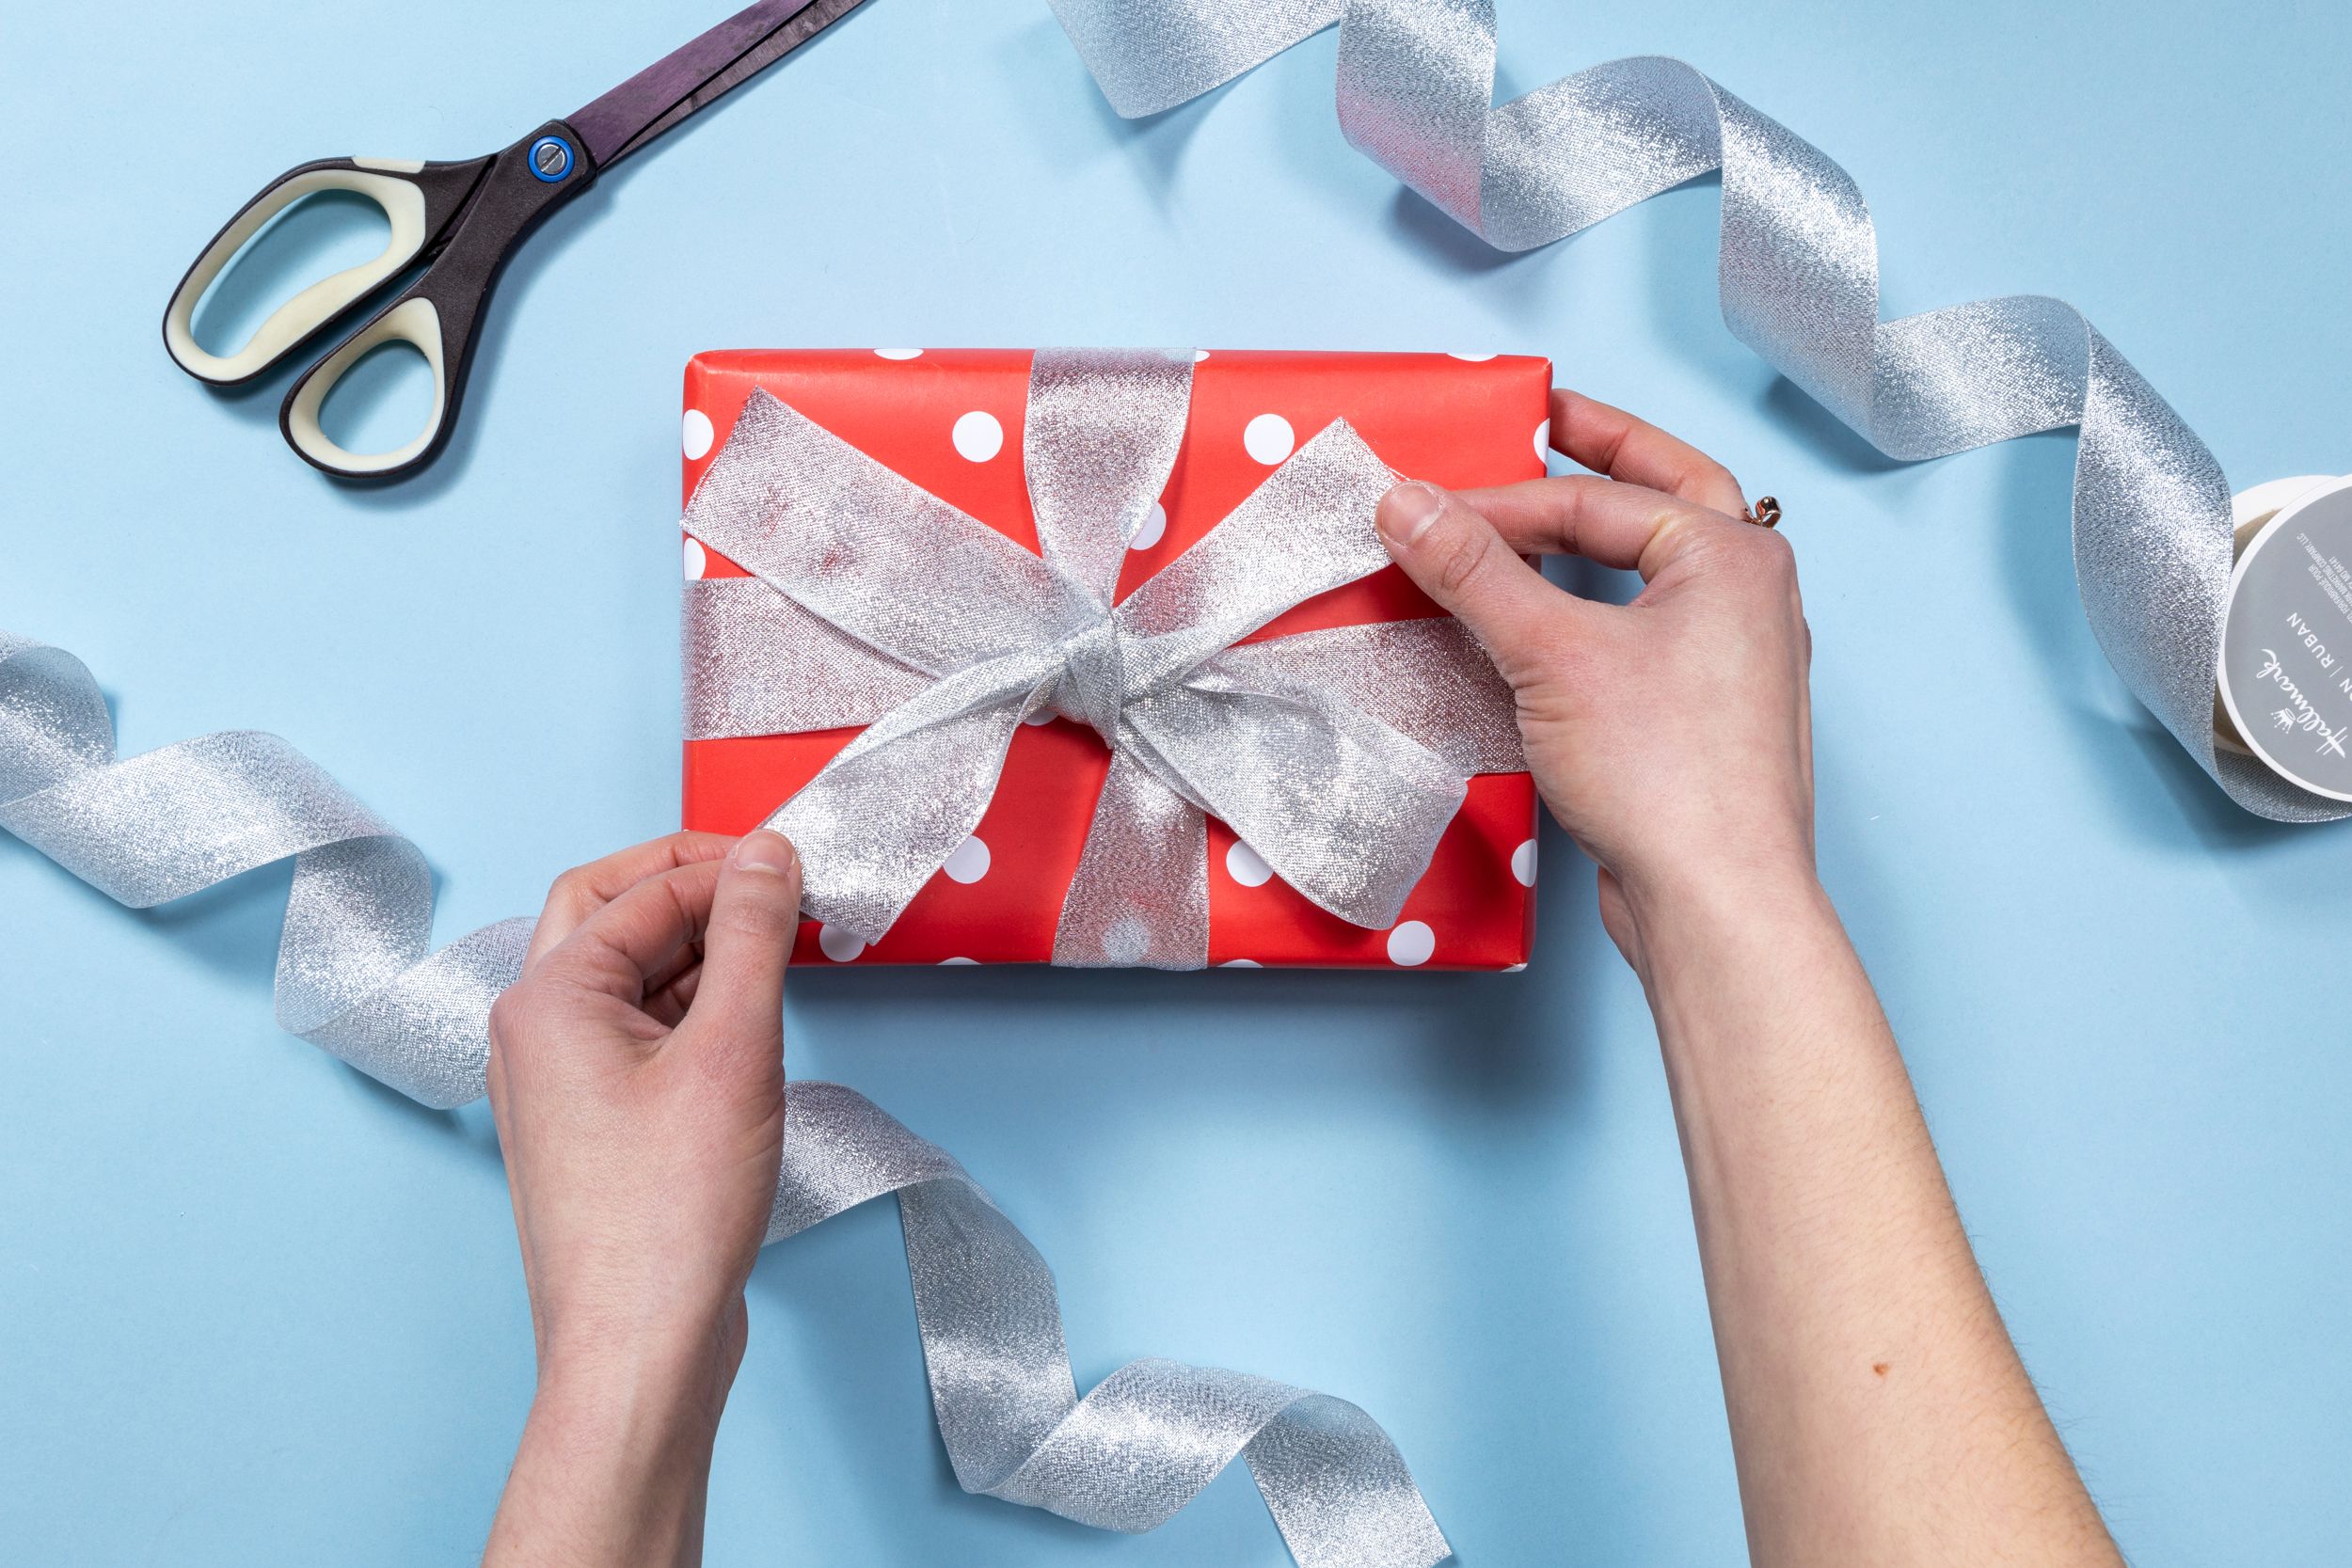 Many happy returns! What are your rights around gift cards and gift  returns?